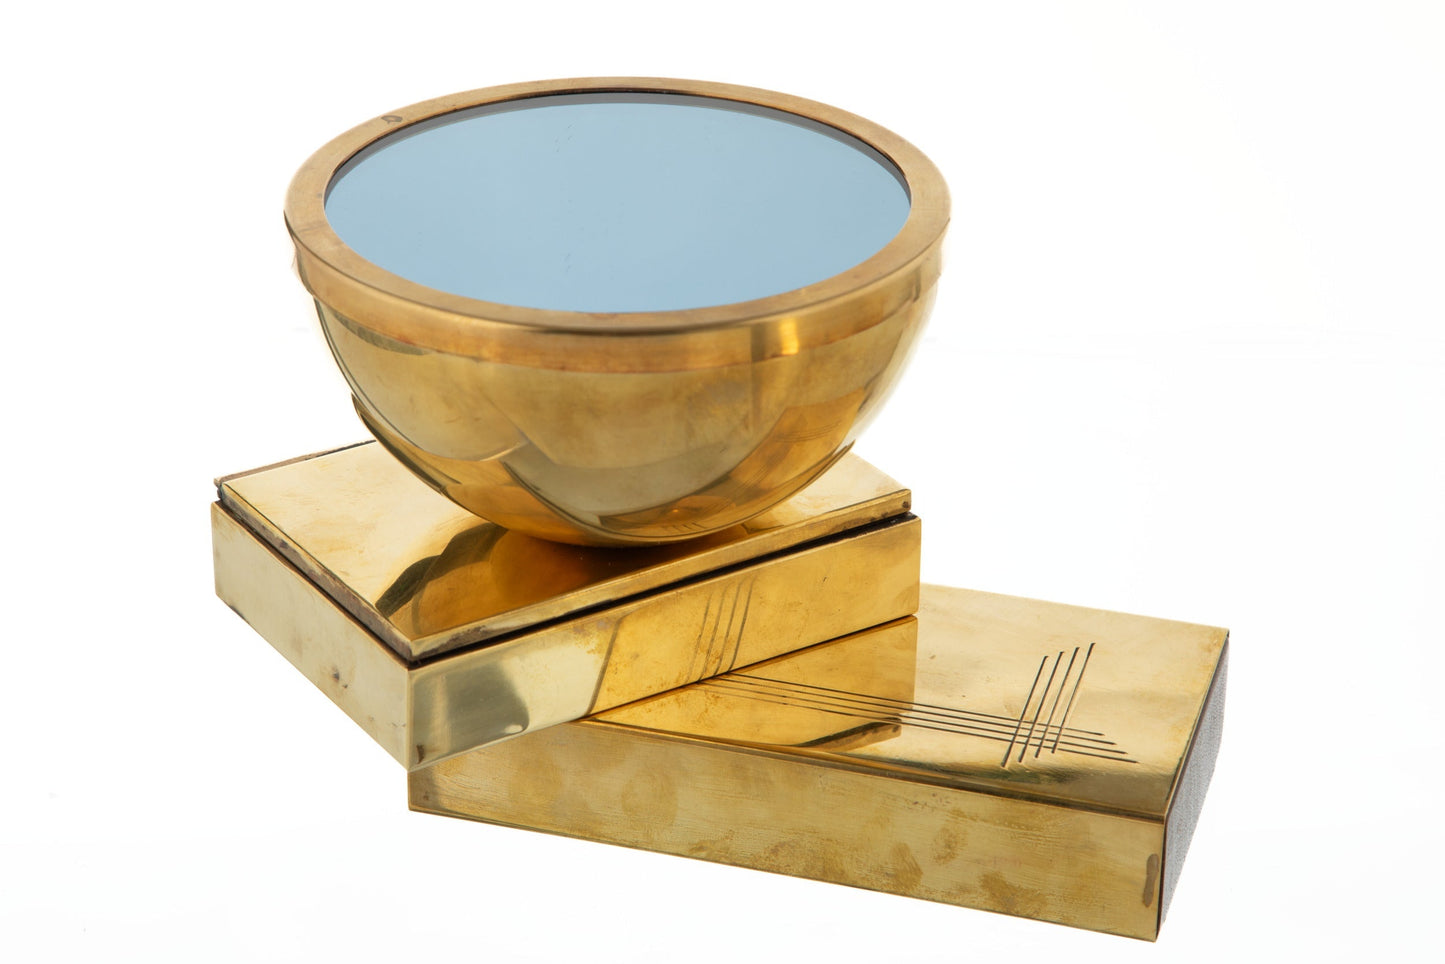 Spherical box in brass and glass from the 70s